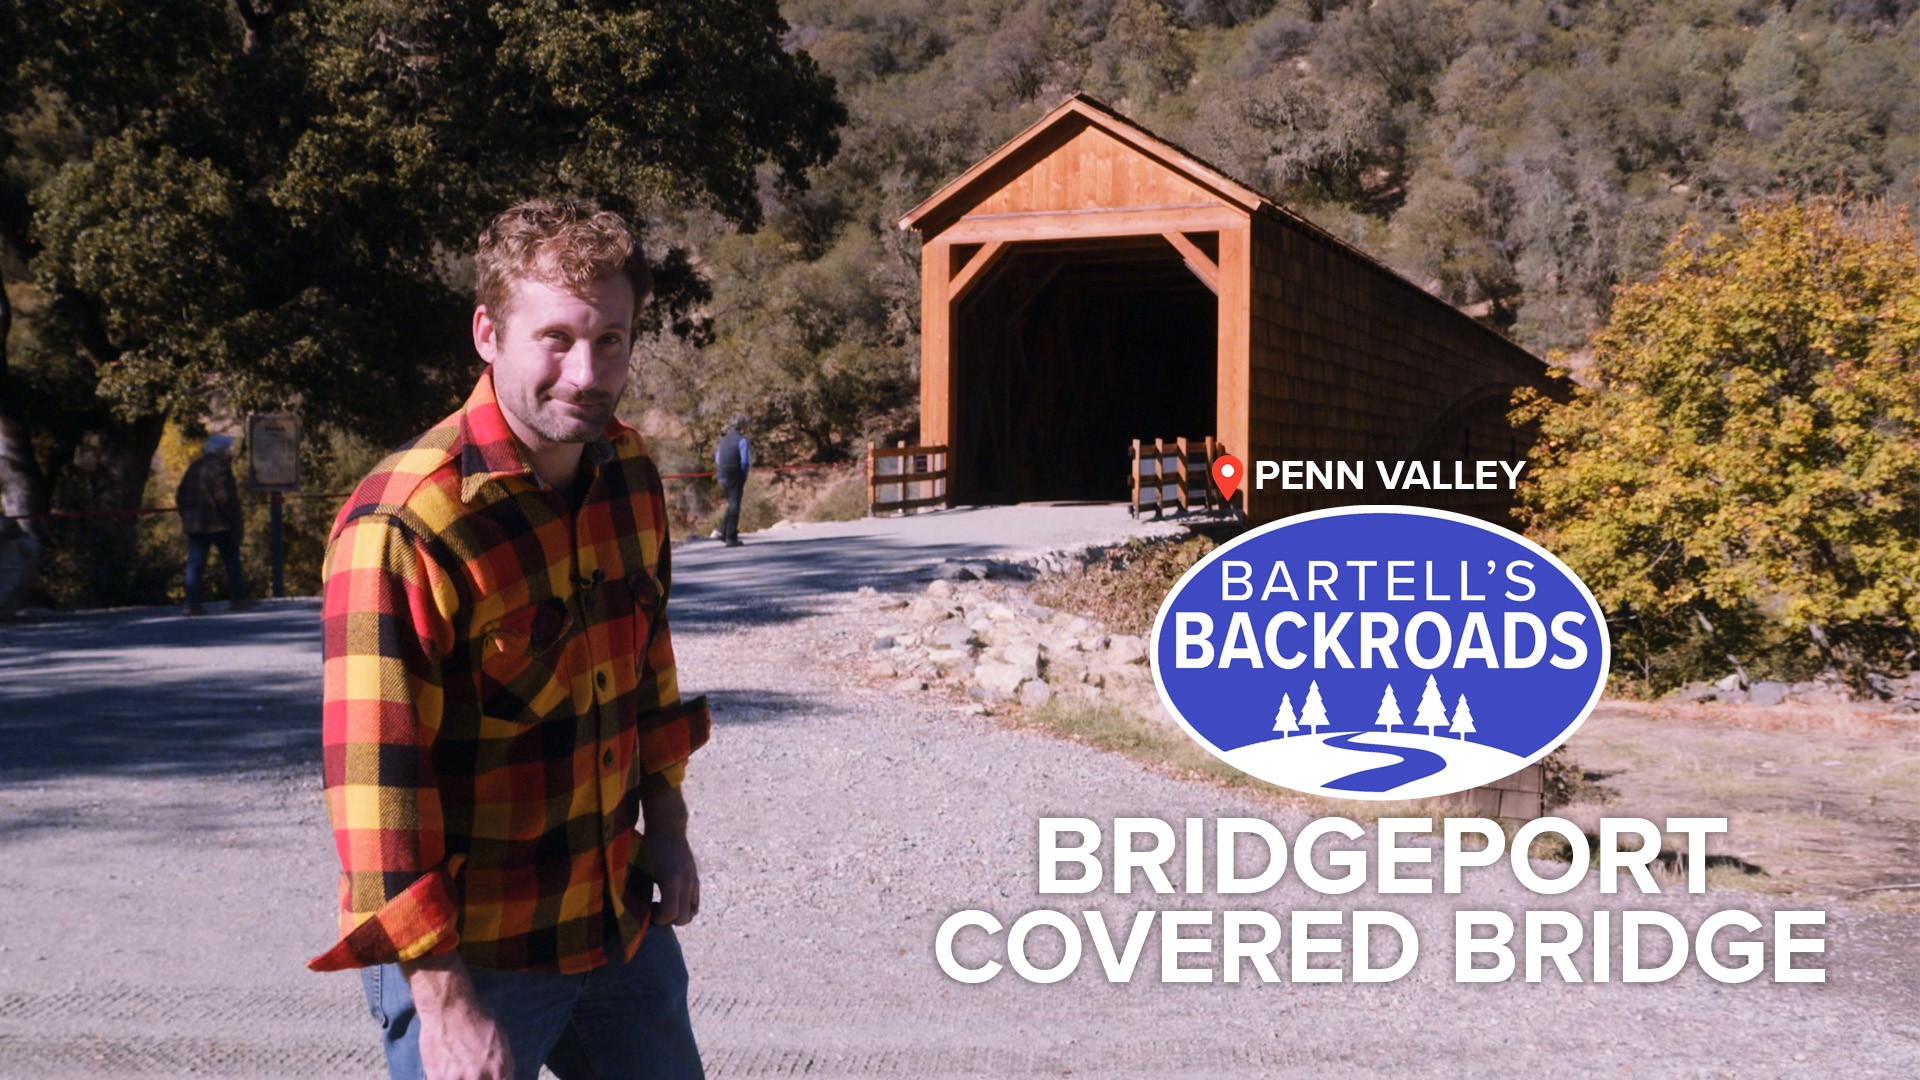 The Bridgeport Covered Bridge spans 226 feet long and 16 feet wide. Like many early bridges built during the gold rush, it was a toll bridge.